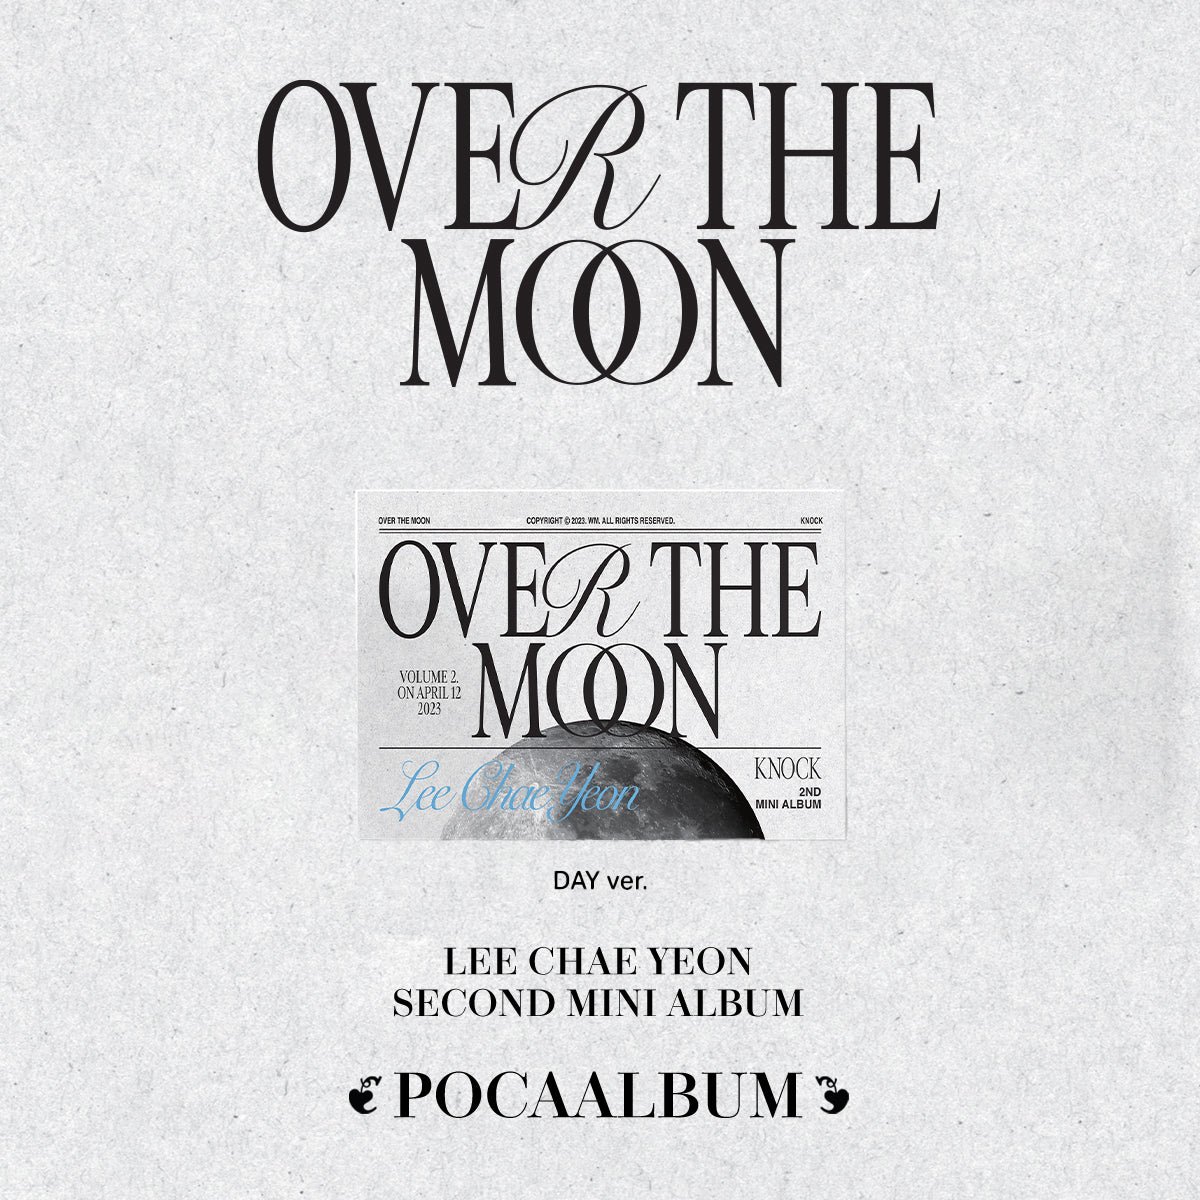 LEE CHAEYEON 2ND MINI ALBUM 'OVER THE MOON' (POCA) DAY VERSION COVER